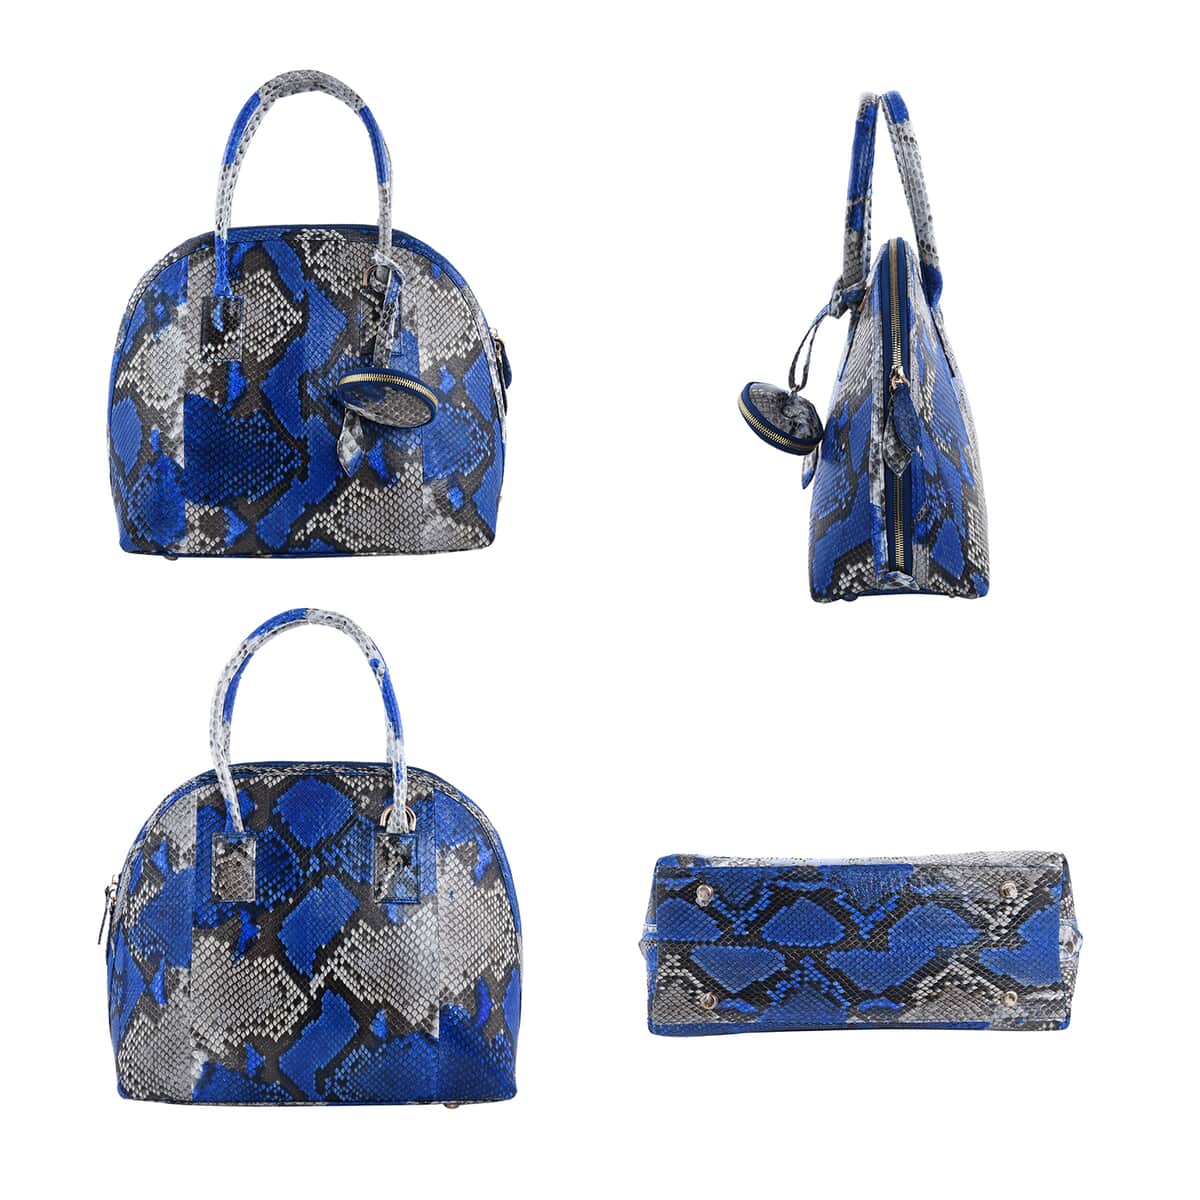 Shop LC Women Handcrafted Blue Python Skin Leather Tote Bag for Handbag  Birthday Gifts